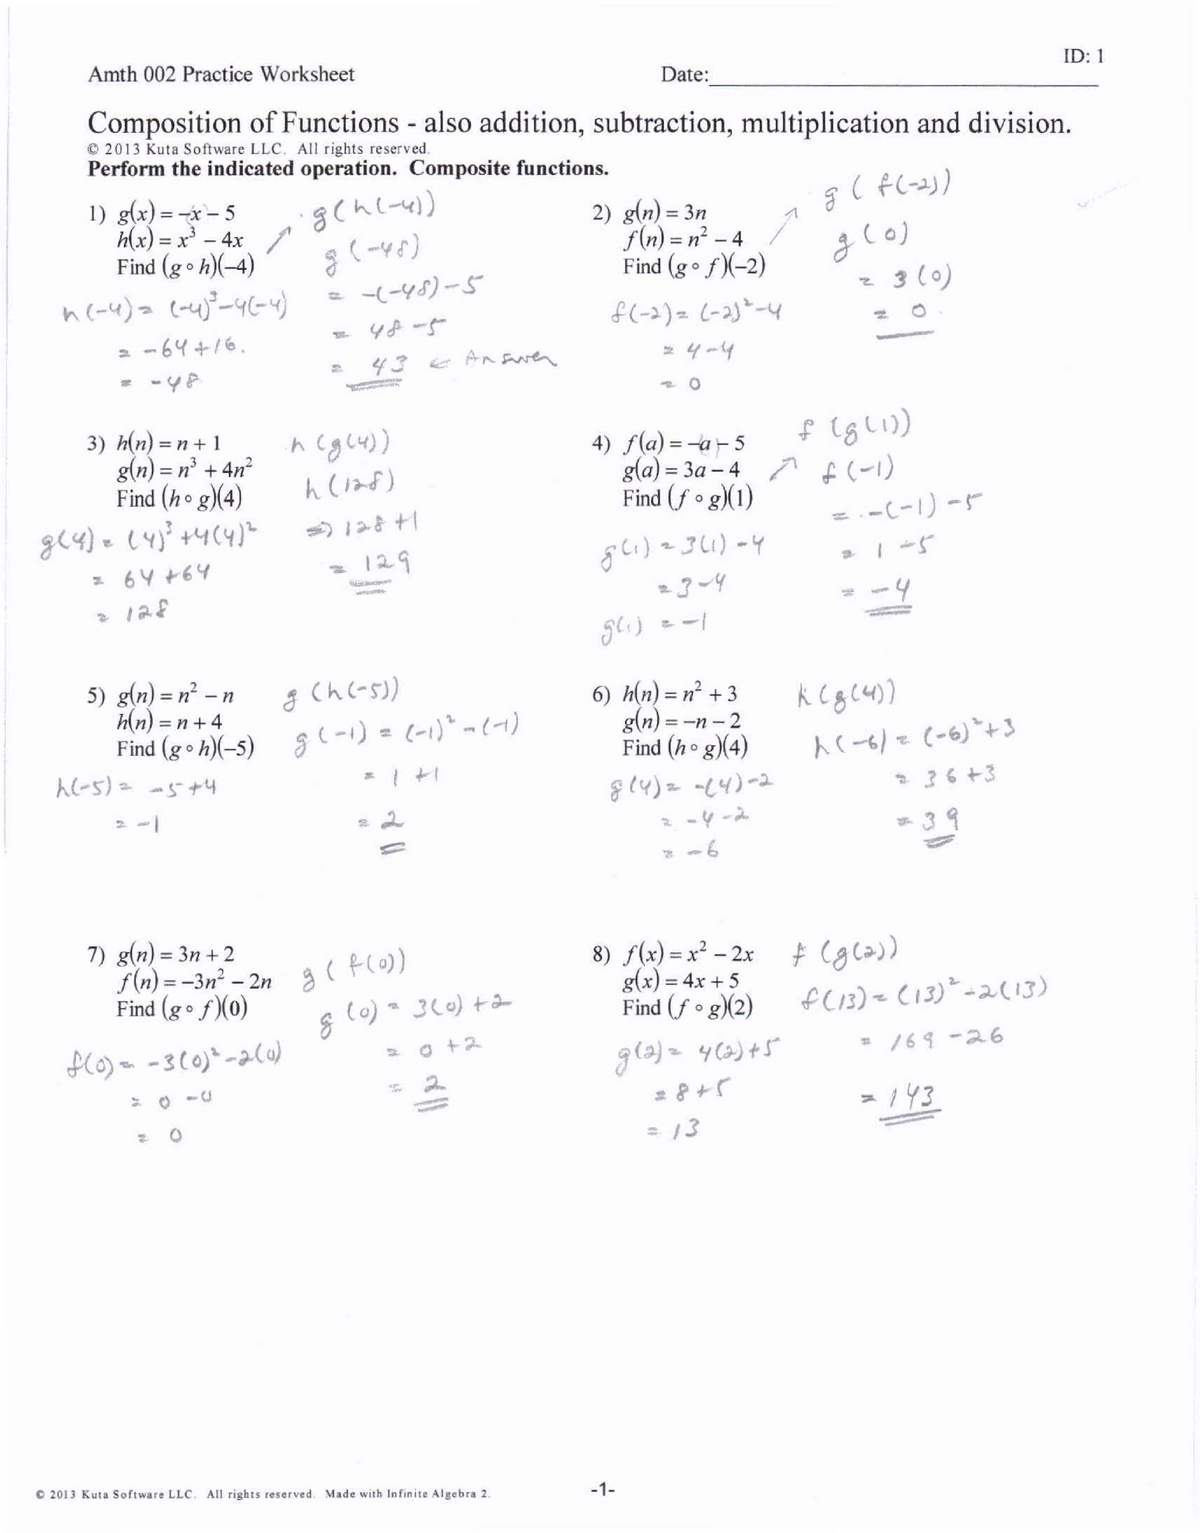 Composition of Functions Answers - AMTH 20 - Mathematics II - UR Pertaining To Composite Functions Worksheet Answers